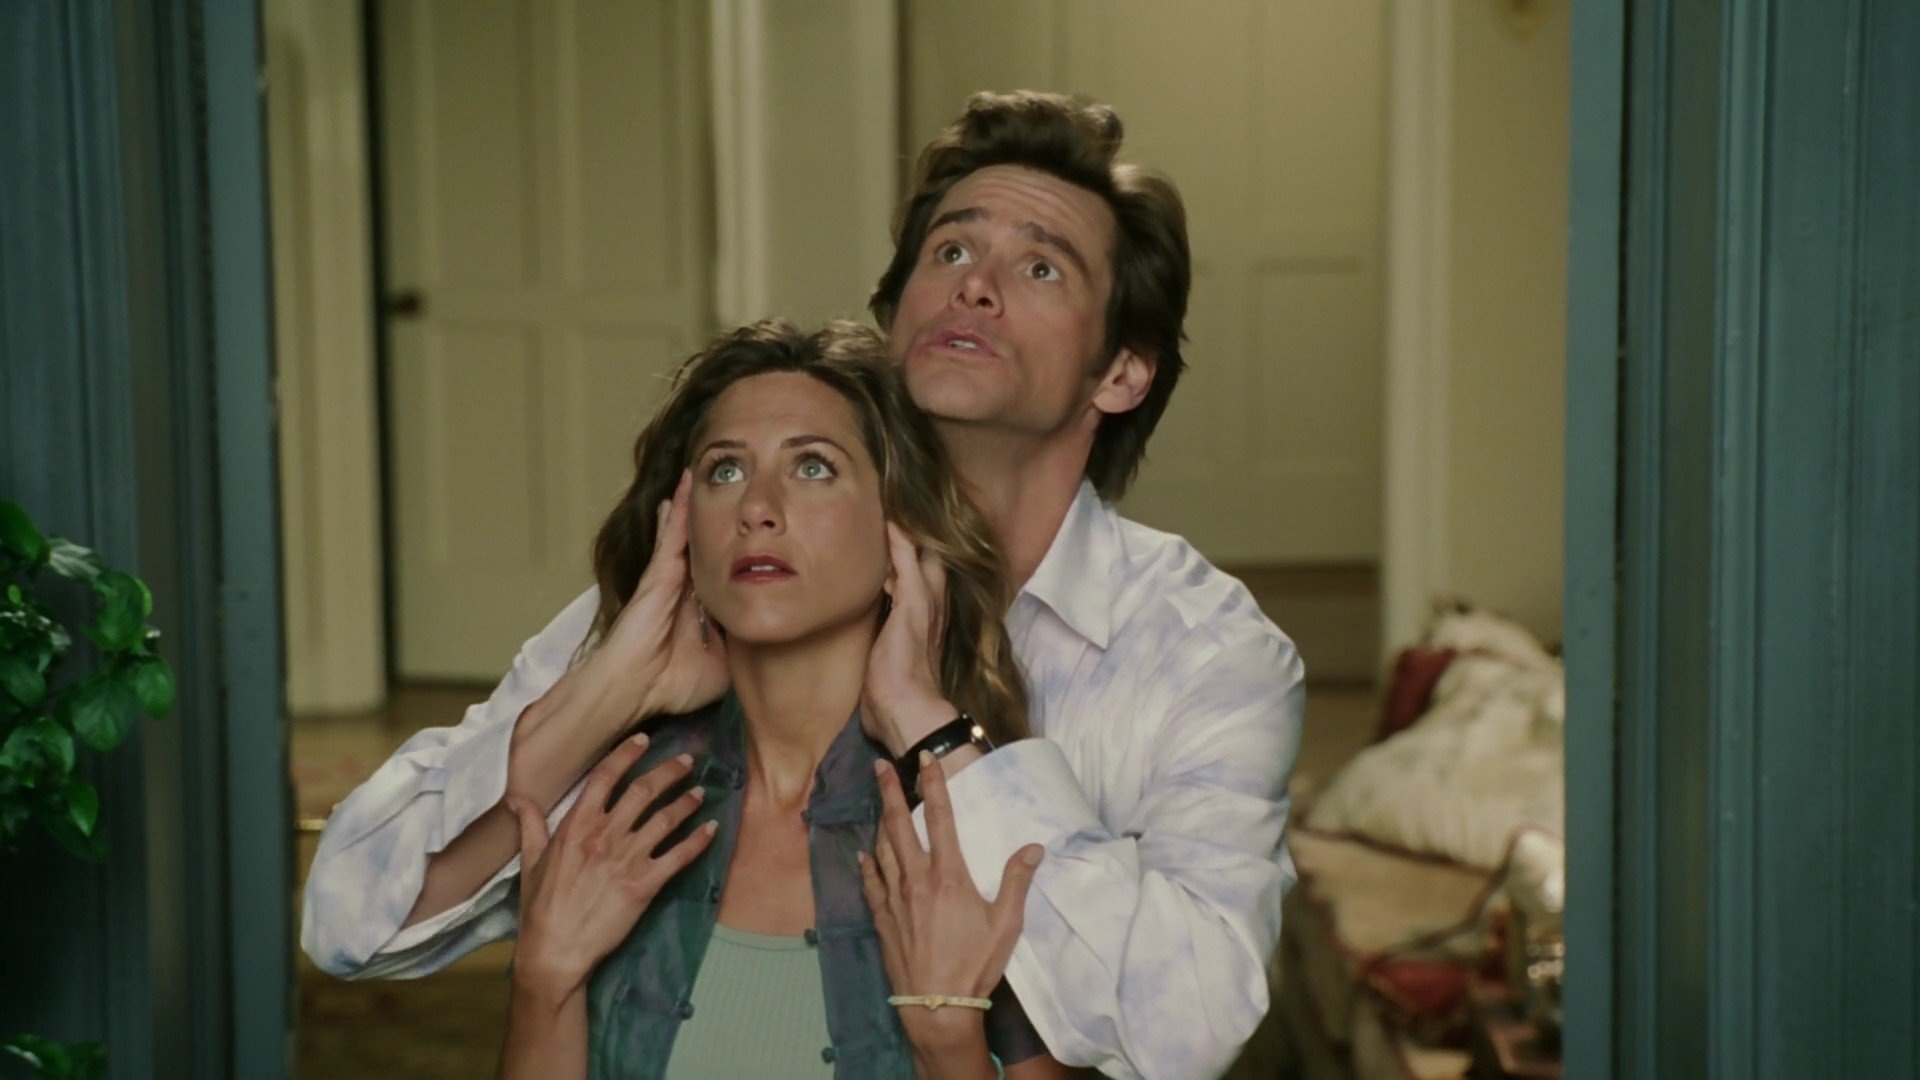 Bruce Almighty, HD wallpapers, Awesome backgrounds, Funny movie, 1920x1080 Full HD Desktop